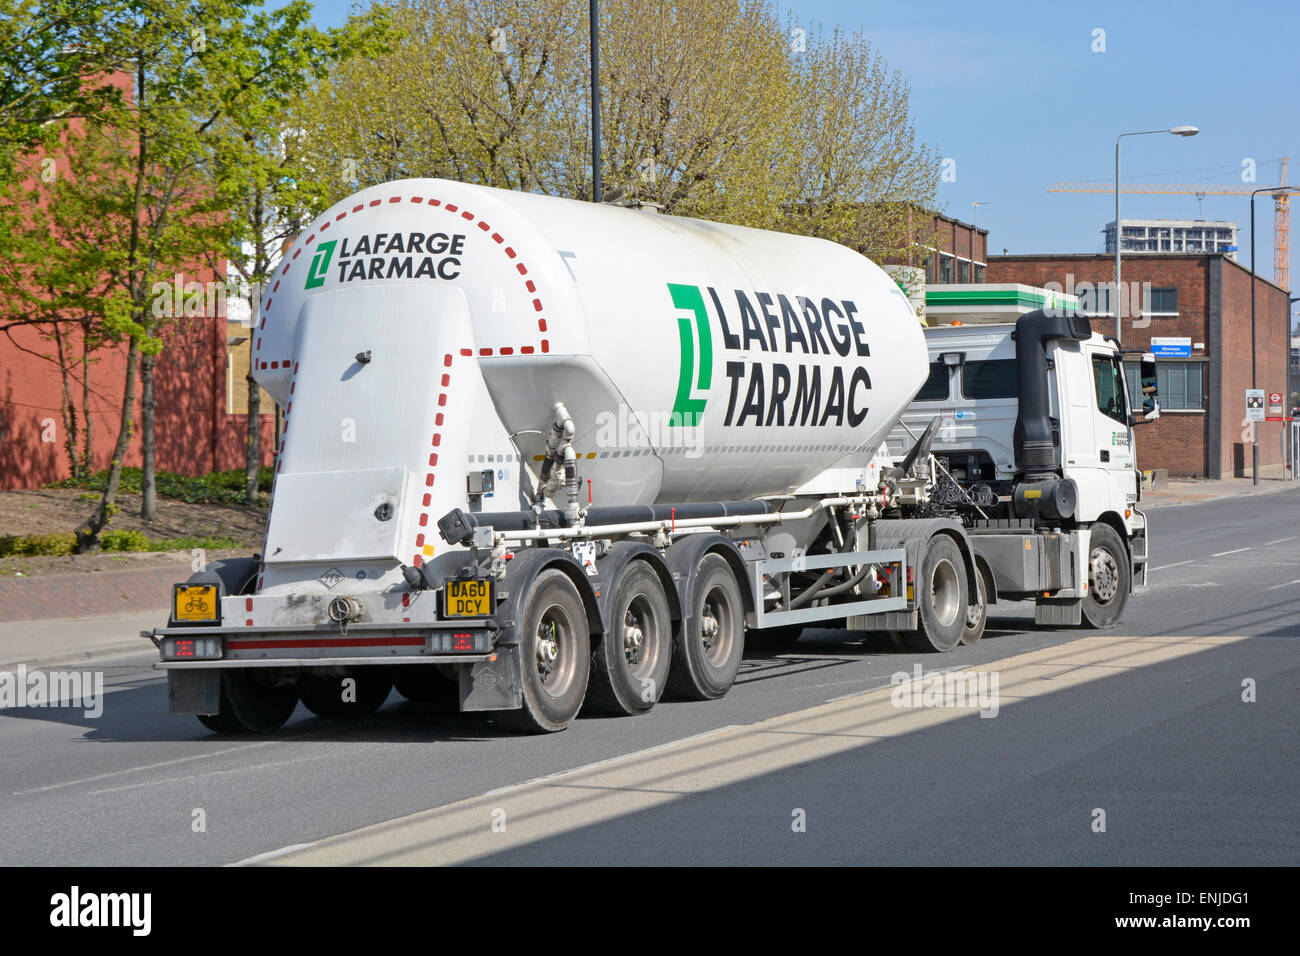 LaFarge Tarmac dry bulk cement delivery by tanker trailer lorry truck